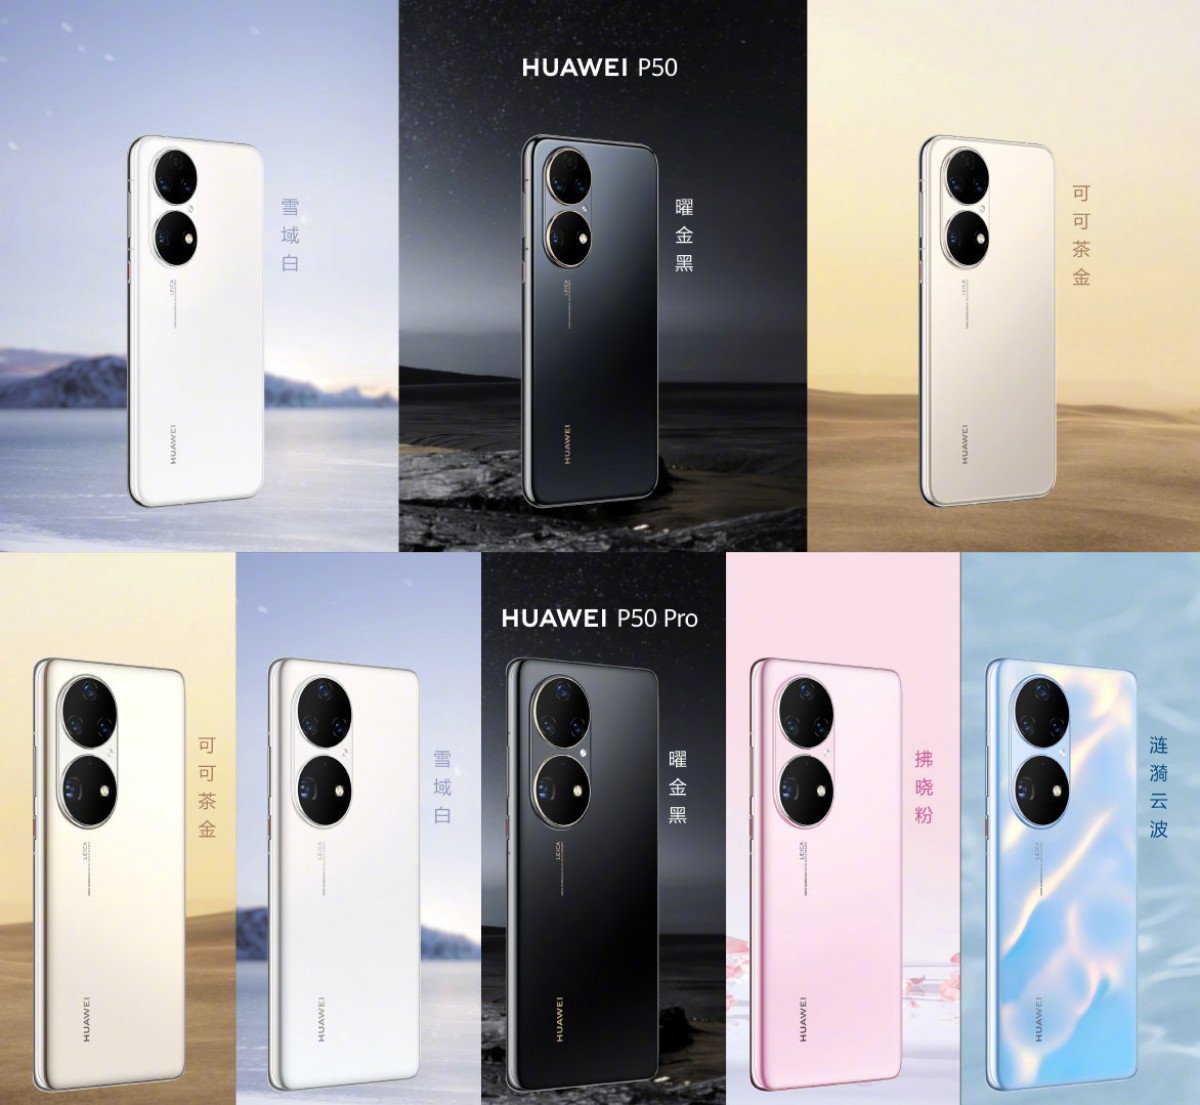 Huawei P50 and P50 Pro unveiled: S888/Kirin 9000 chipsets in 4G, upgraded cameras